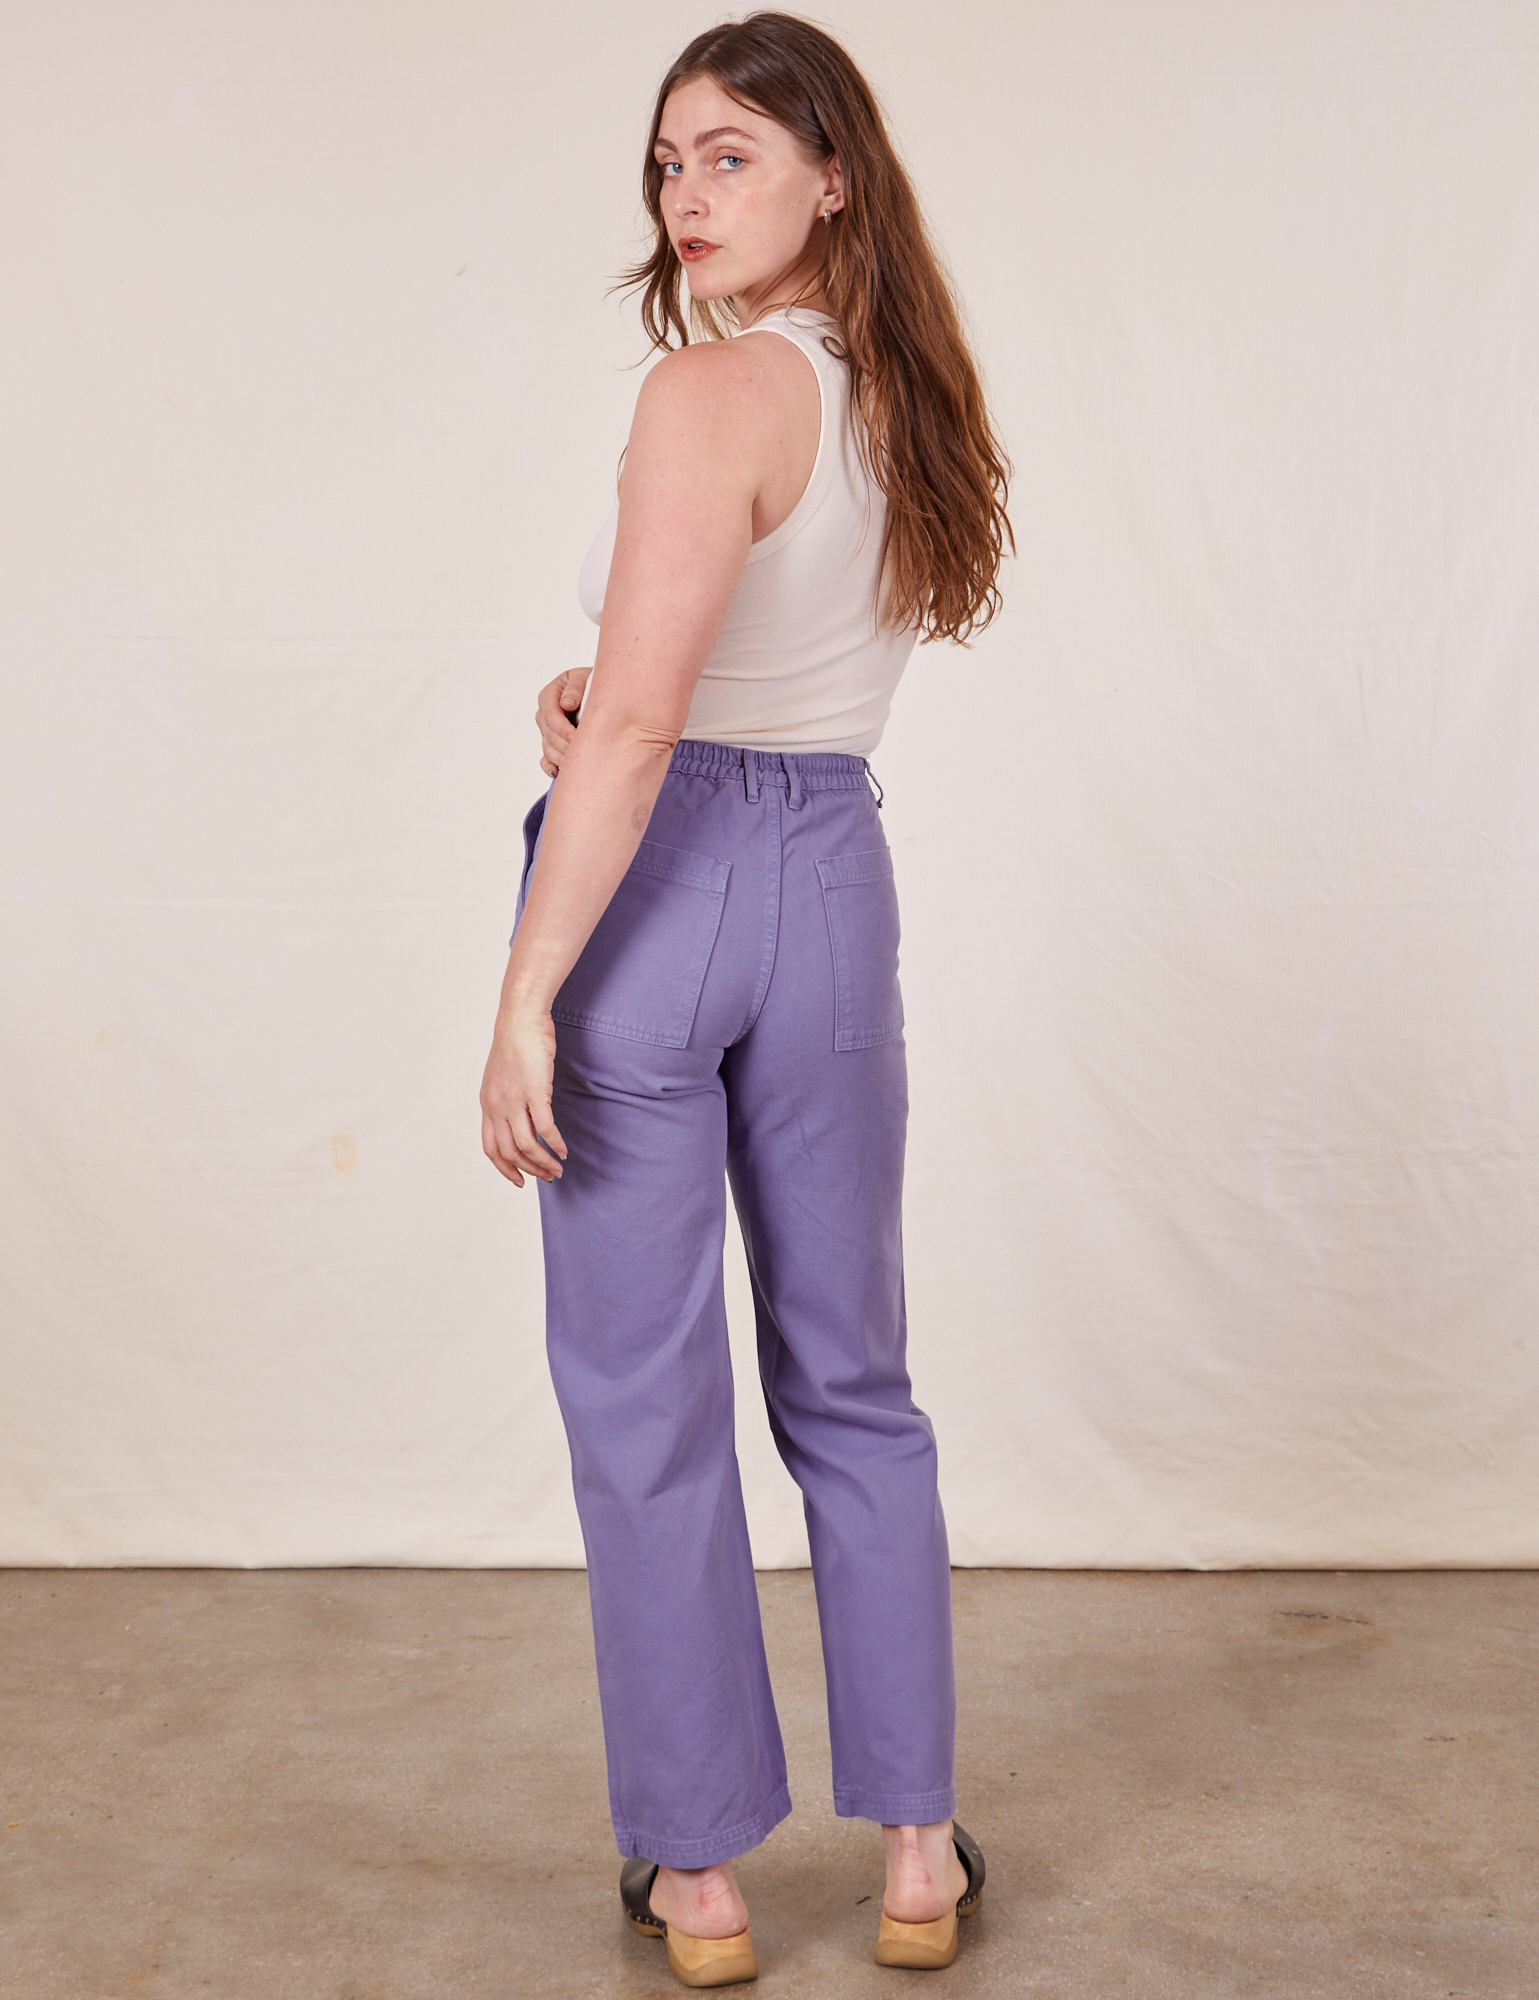 Work Pants in Faded Grape back view on Allison wearing vintage off-white Tank Top